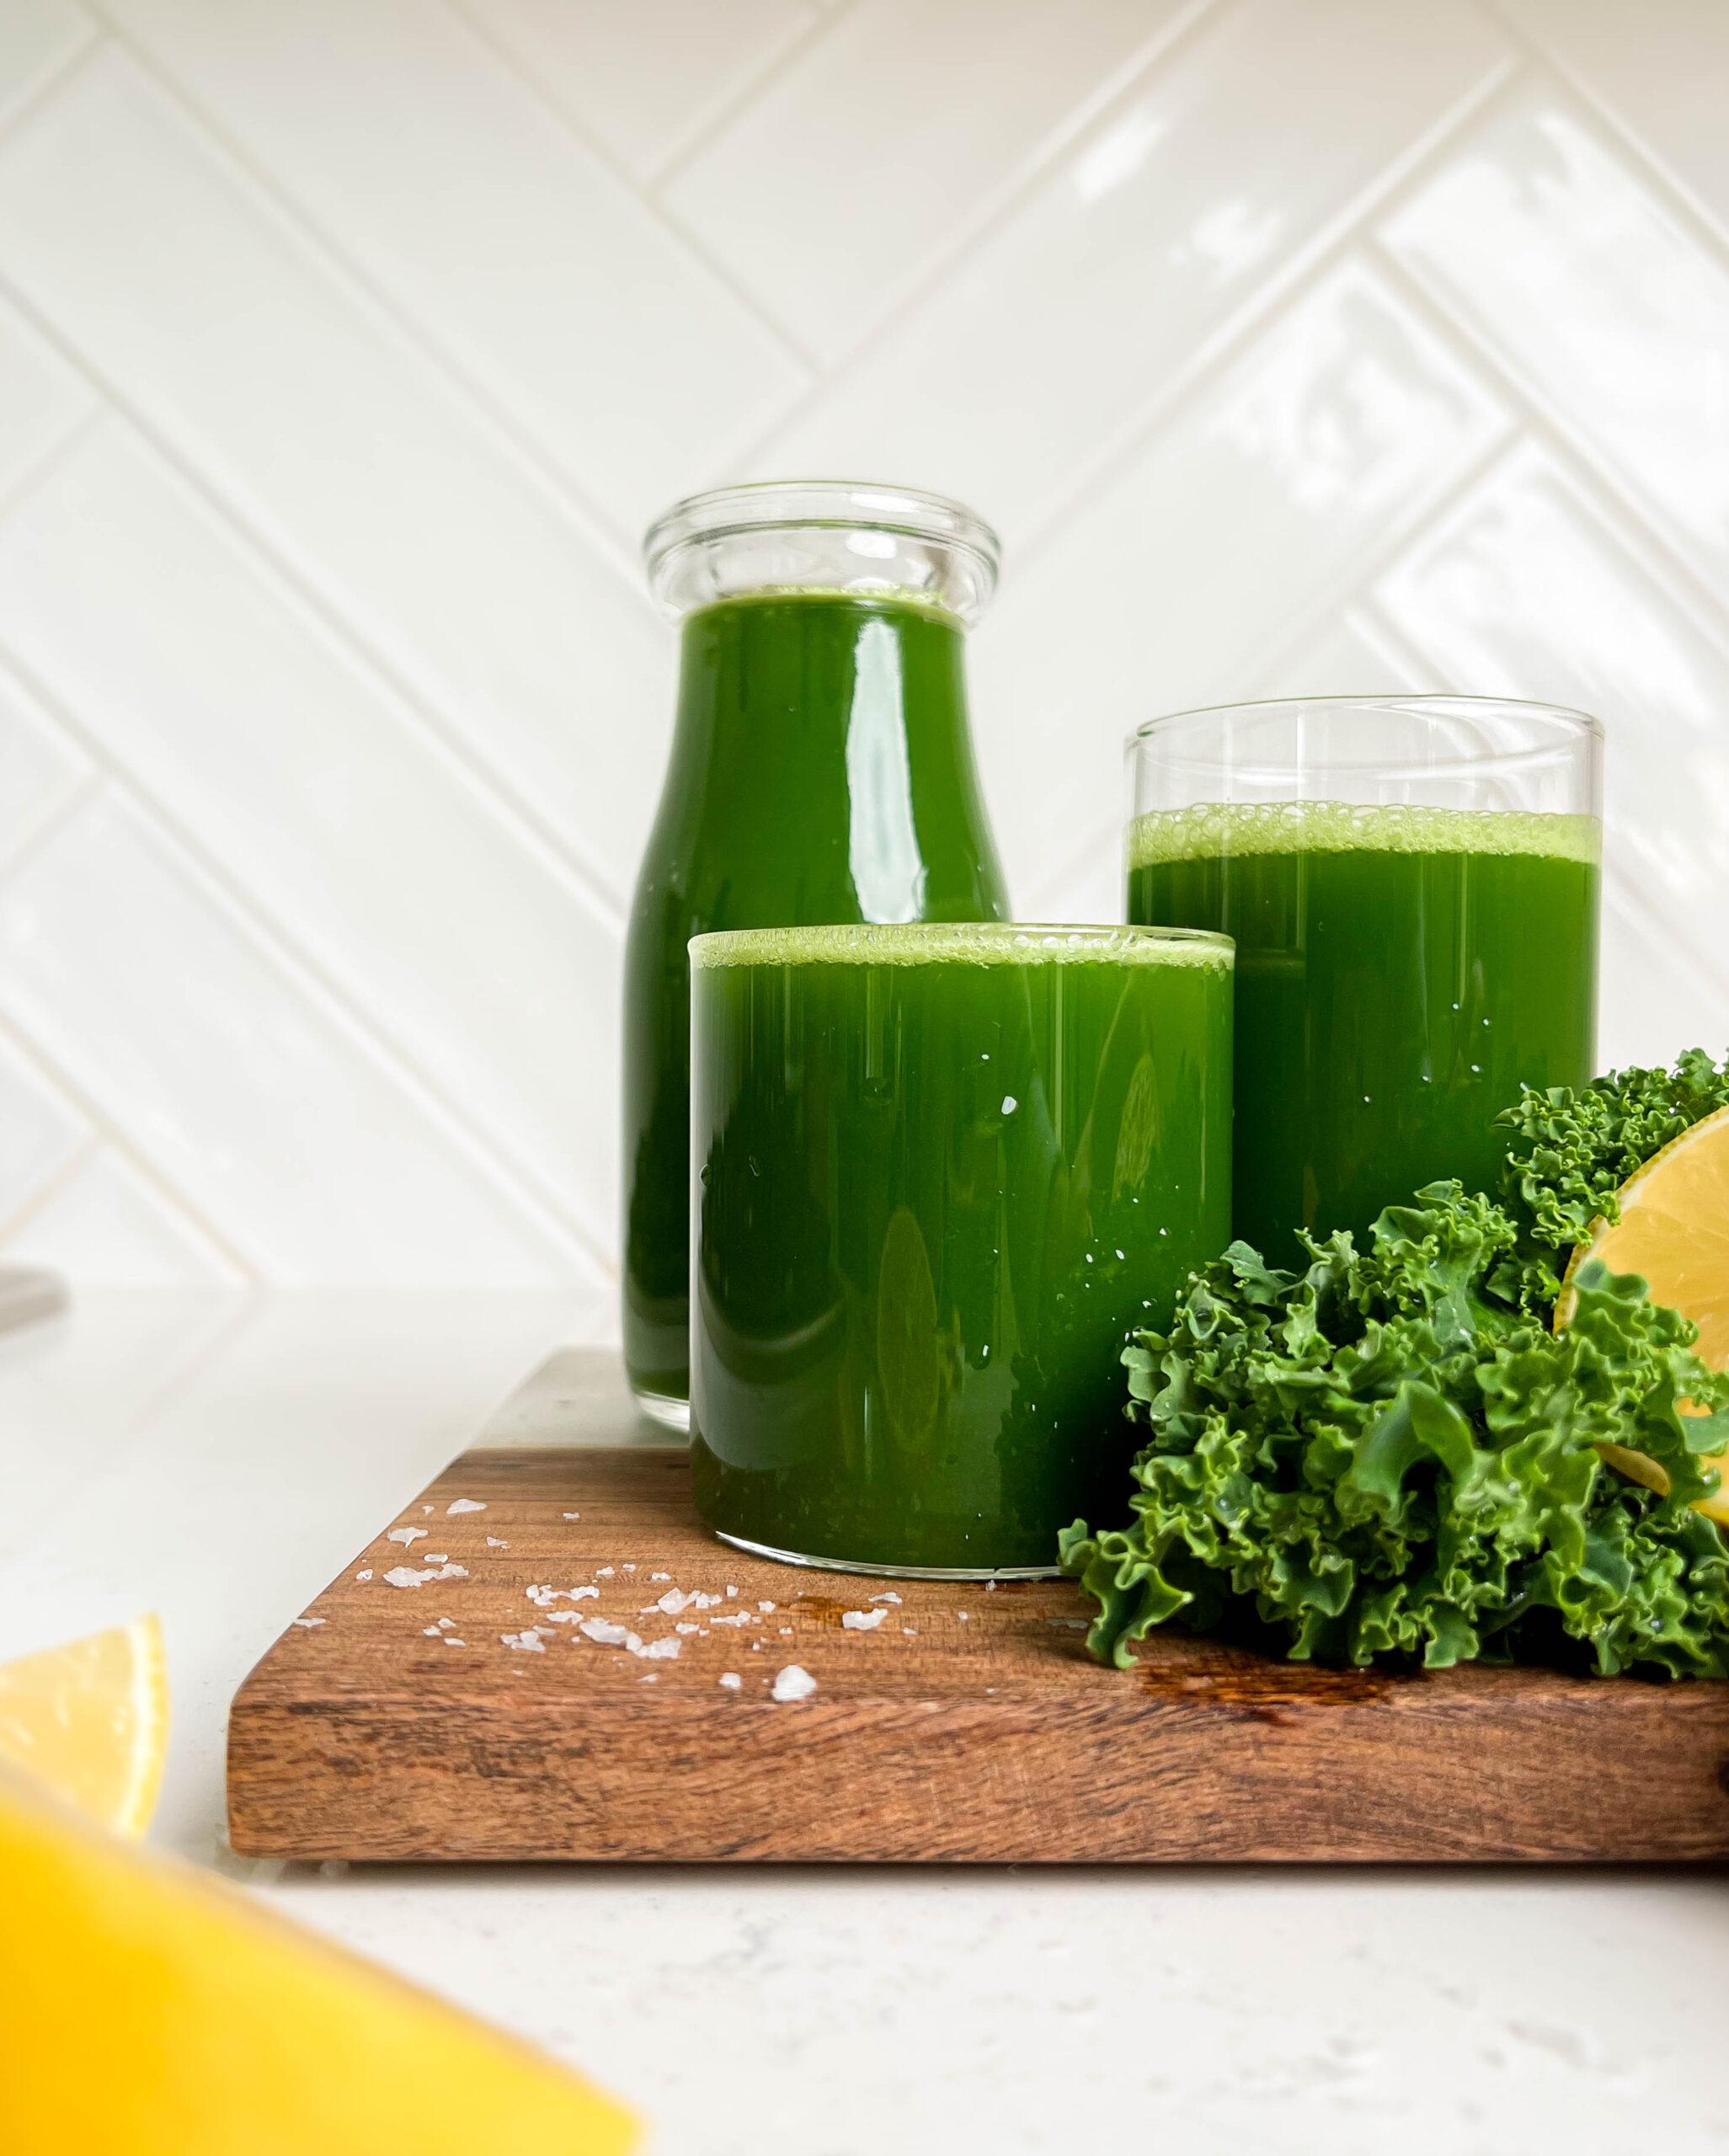 easy green juice in a jar and two glasses on wooden cutting board next to kale and lemons